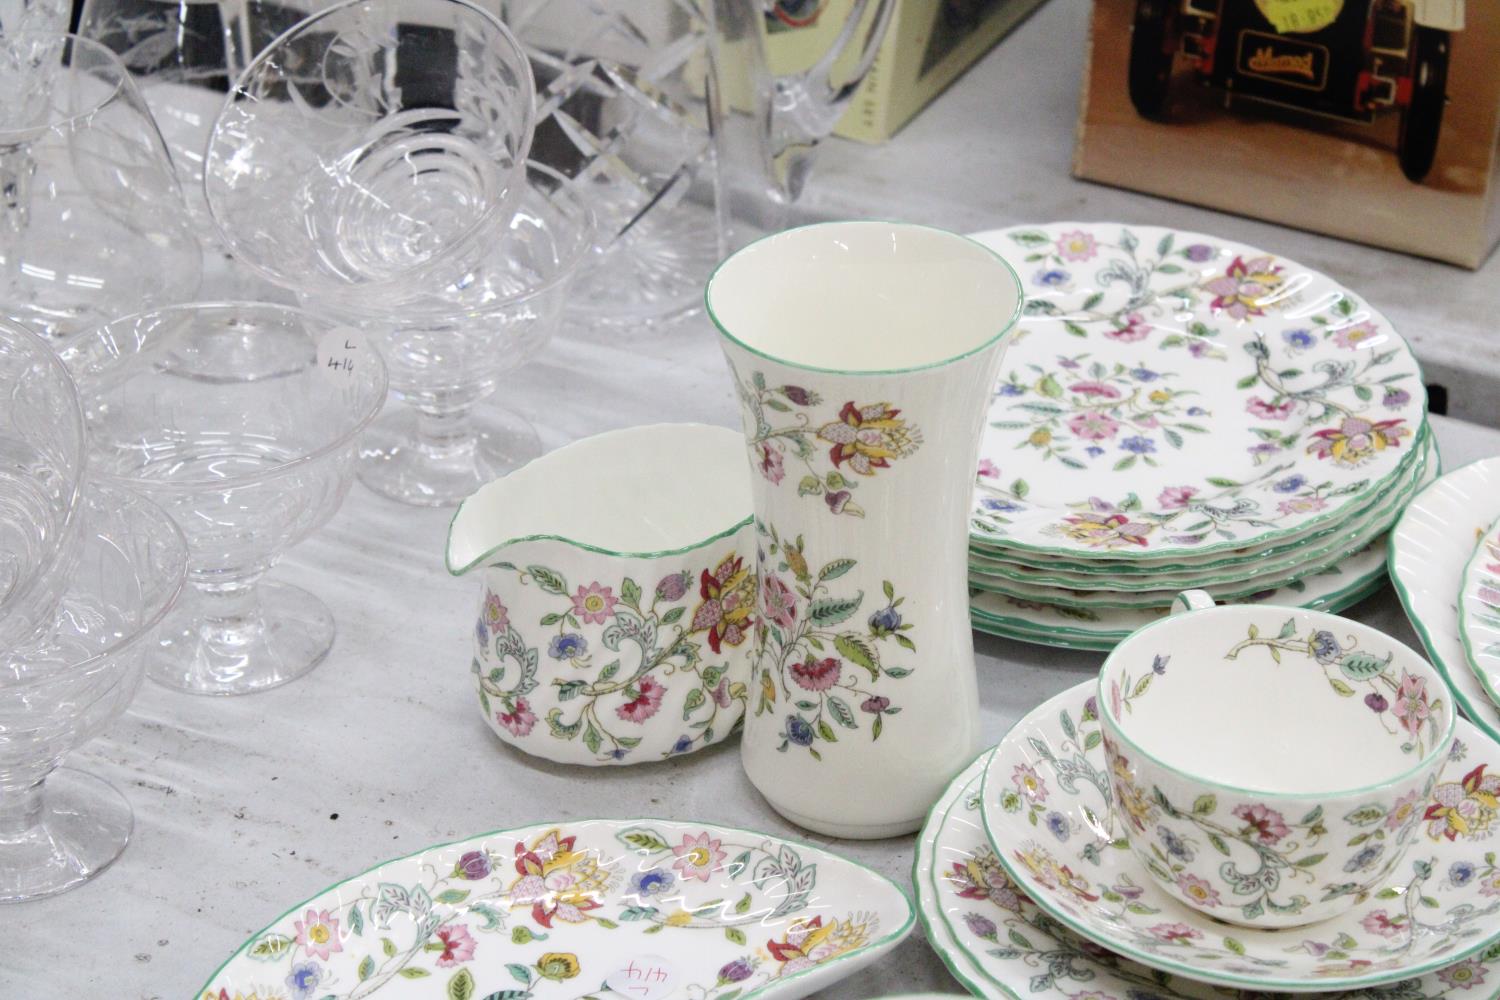 A LARGE MINTON "HADDON HALL" TEA SET TO INCLUDE CUPS, SAUCERS, SIDE PLATES, CAKE PLATES, SUGAR - Image 4 of 6